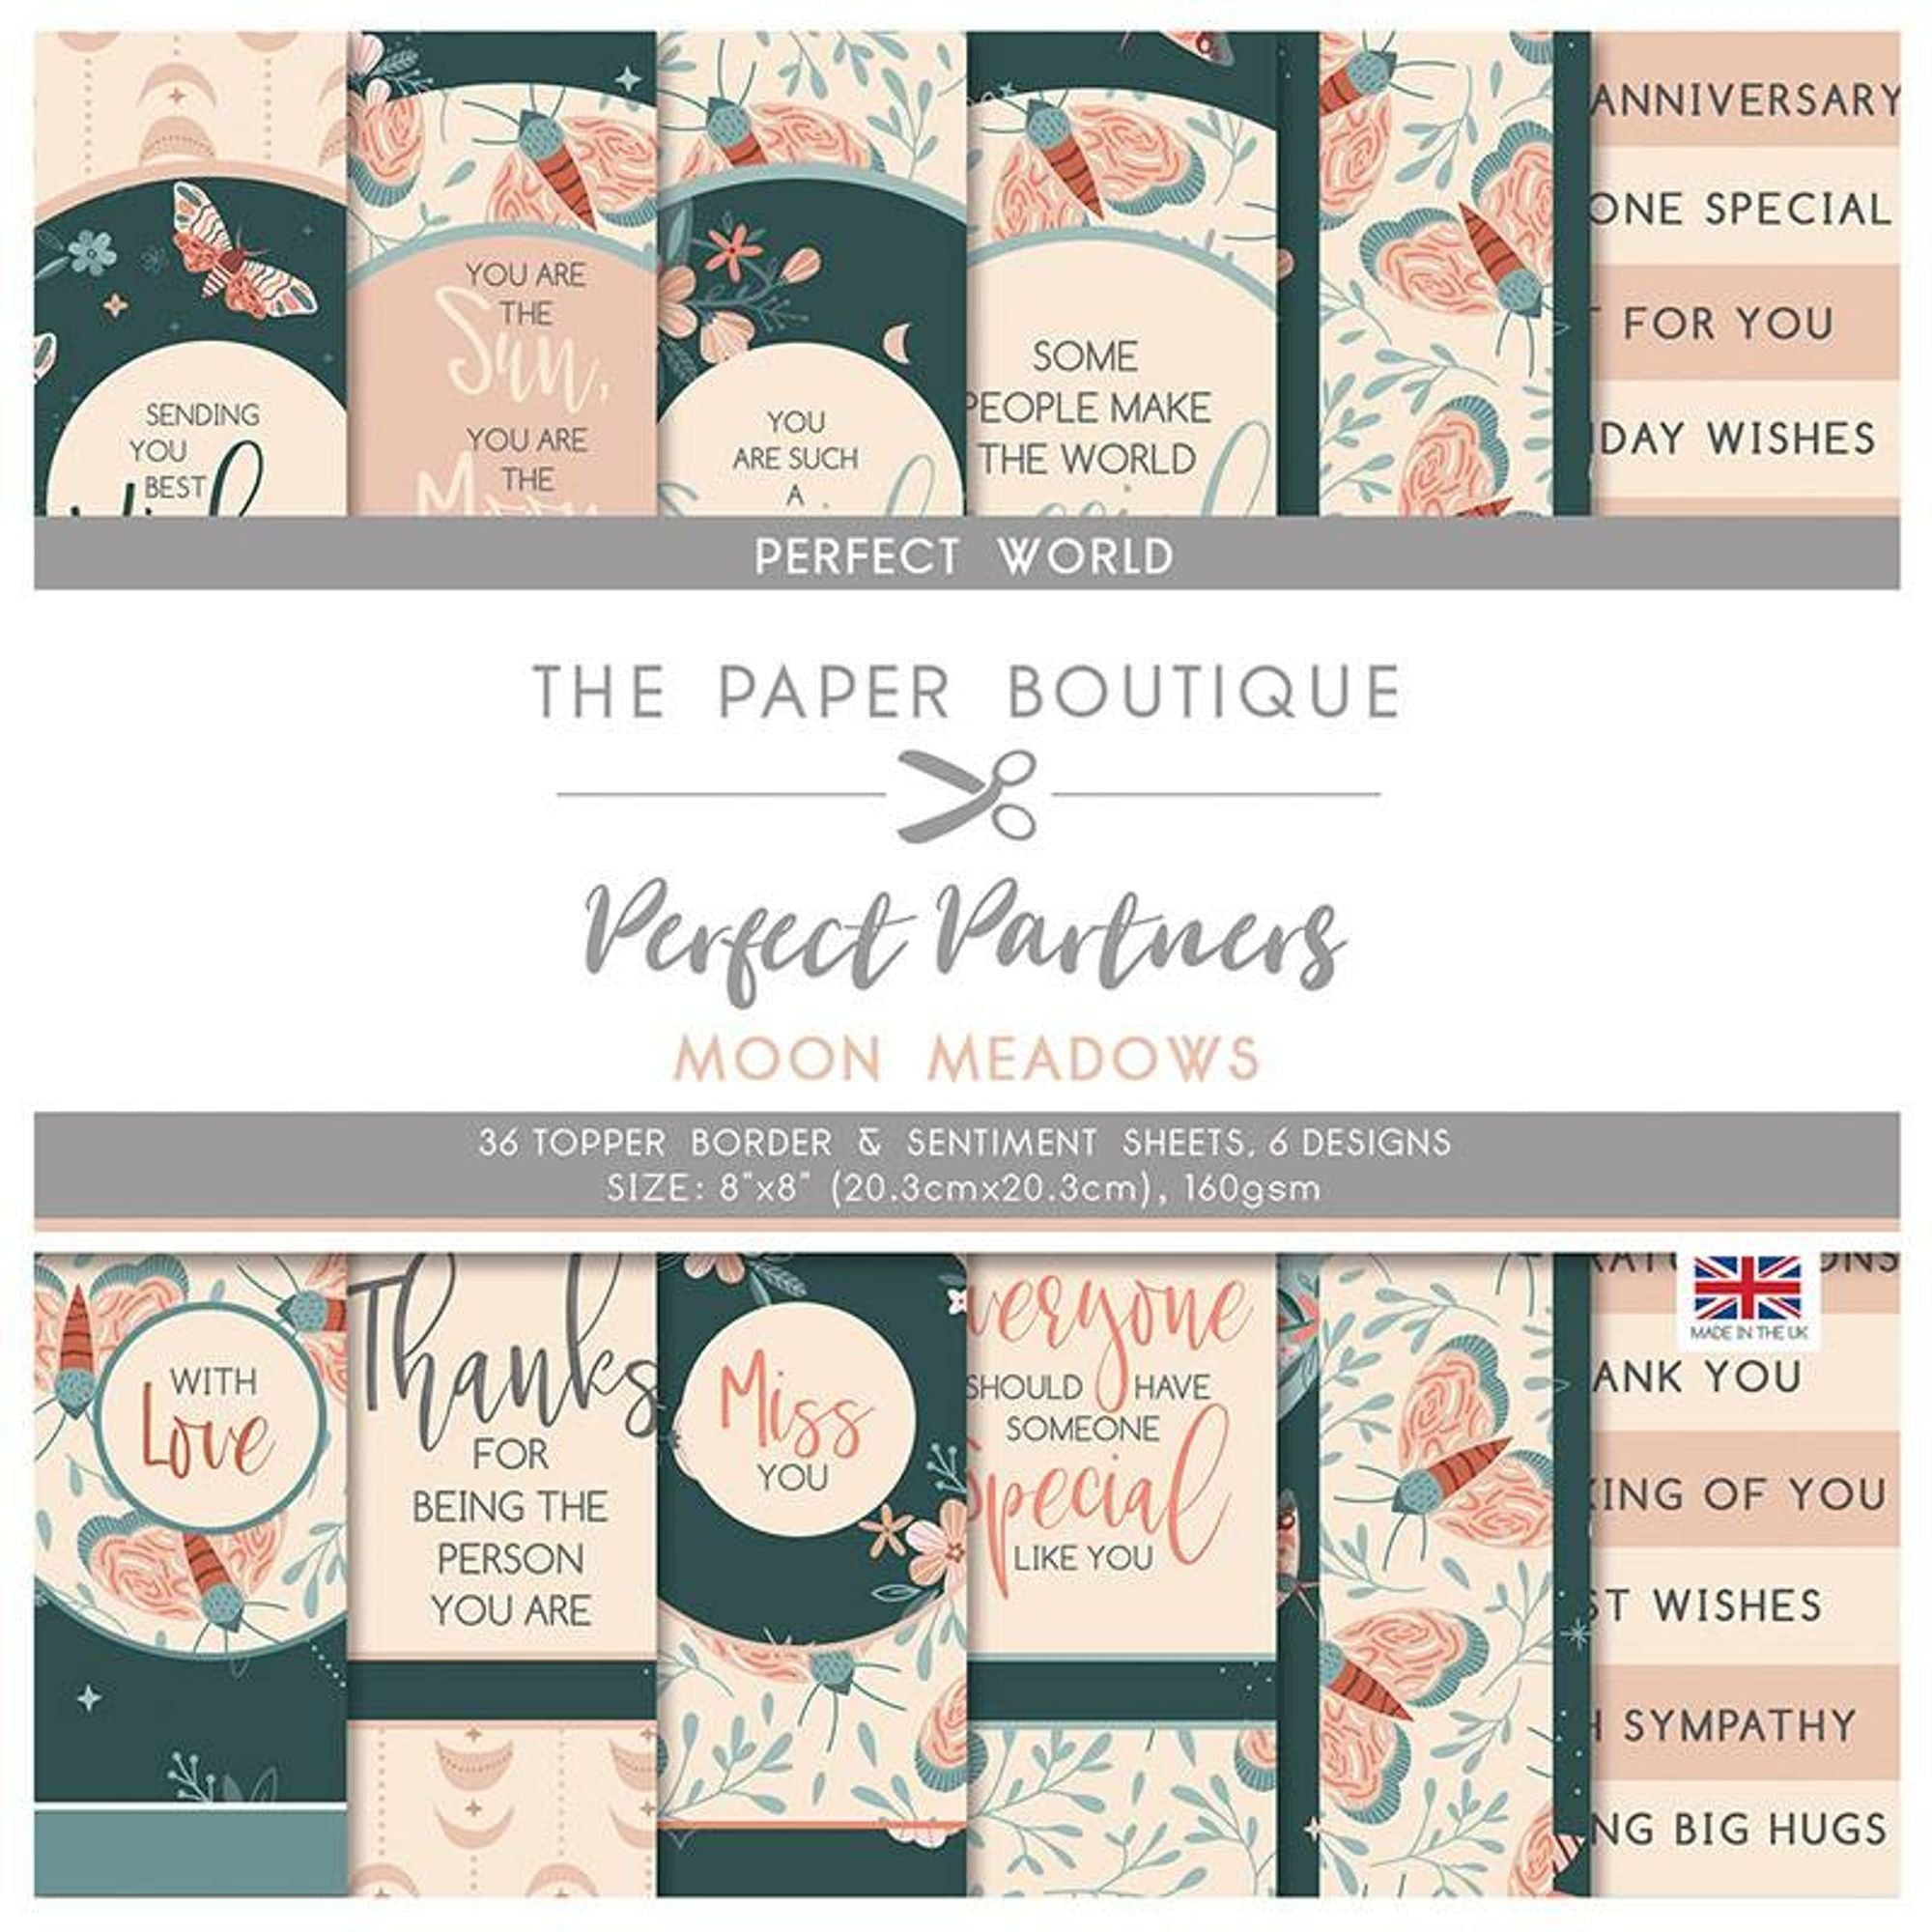 The Paper Boutique Perfect Partners - Moon Meadows 8x8 Toppers